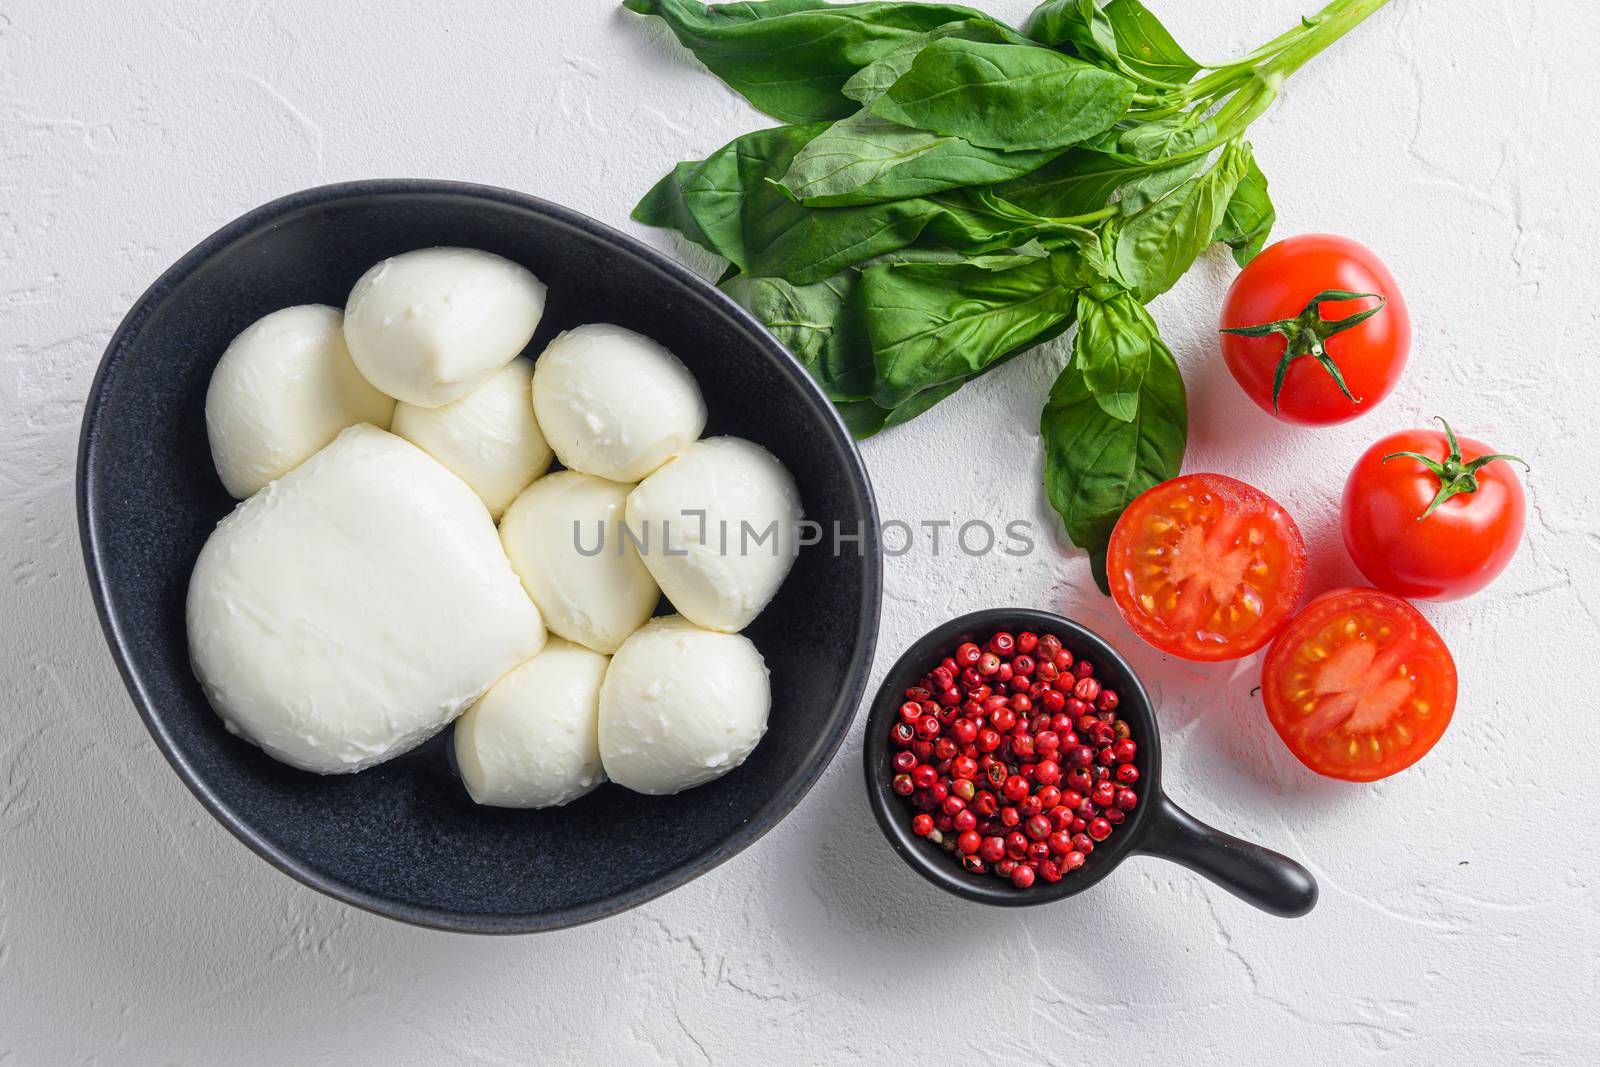 Mozzarella cheese balls with fresh basil leaves and cherry tomatoes, the ingredients of the Italian Caprese salad, on white background overhead photo.